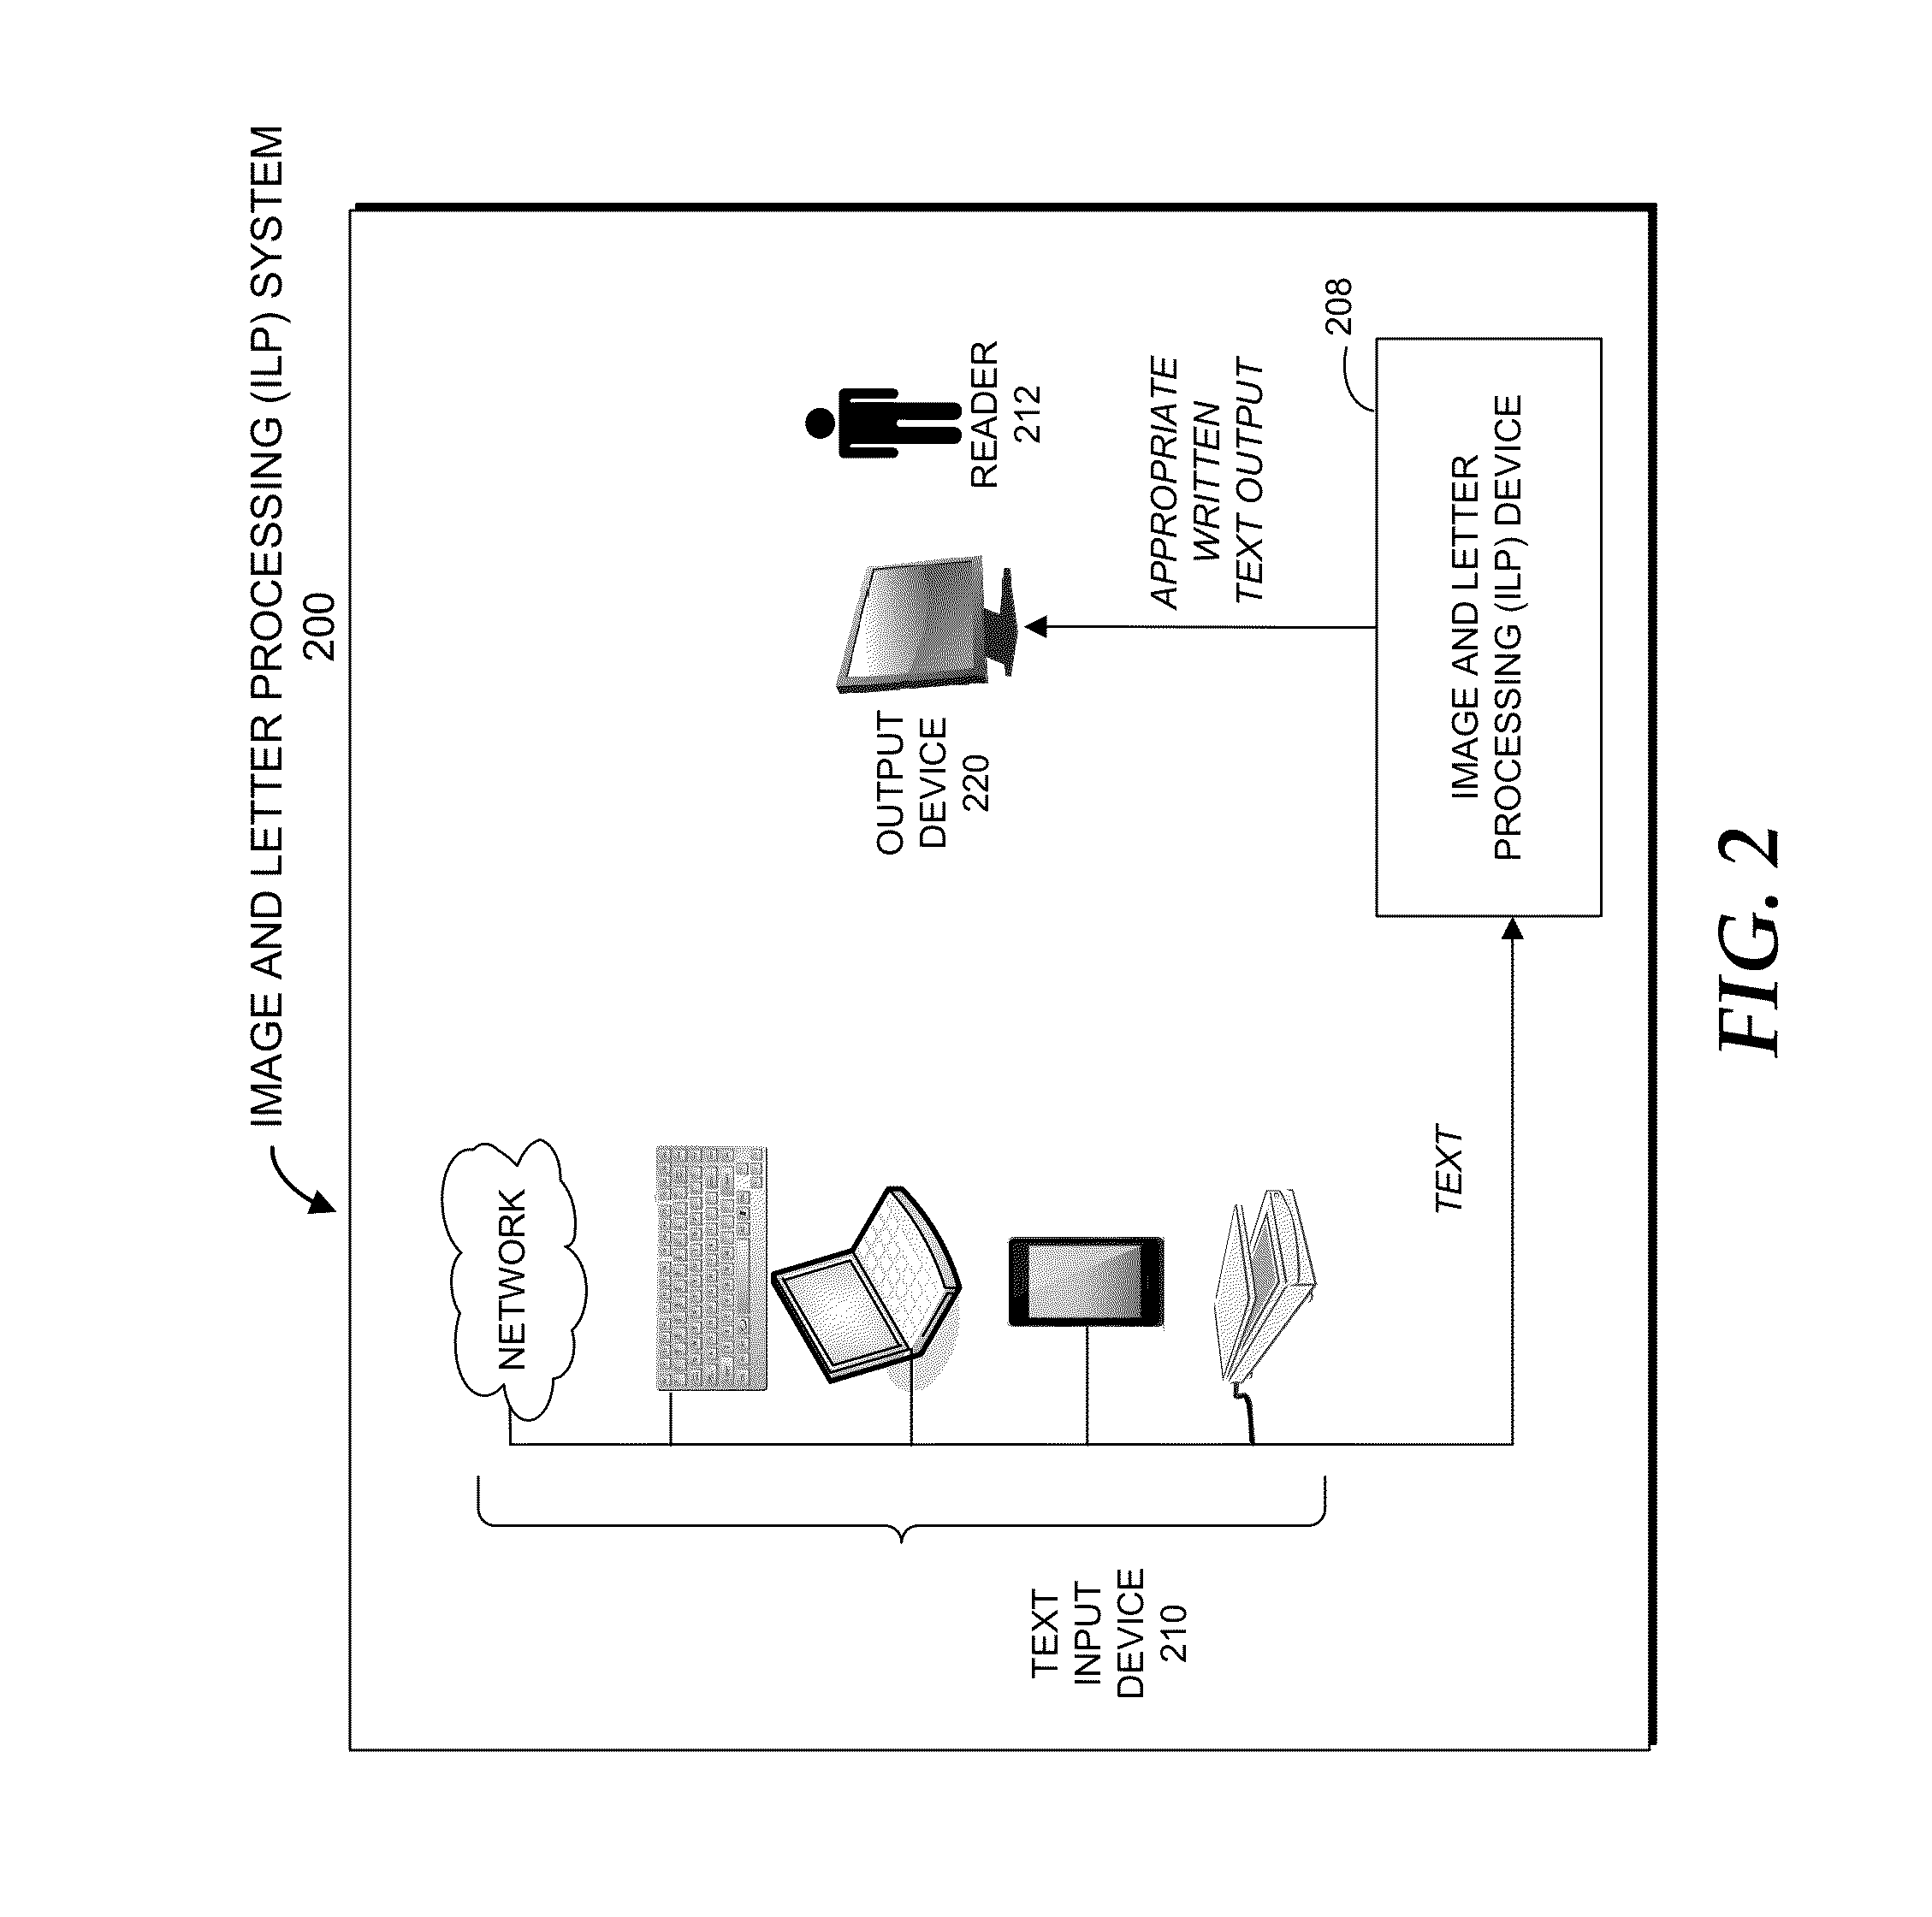 Method and system for representing capitalization of letters while preserving their category similarity to lowercase letters